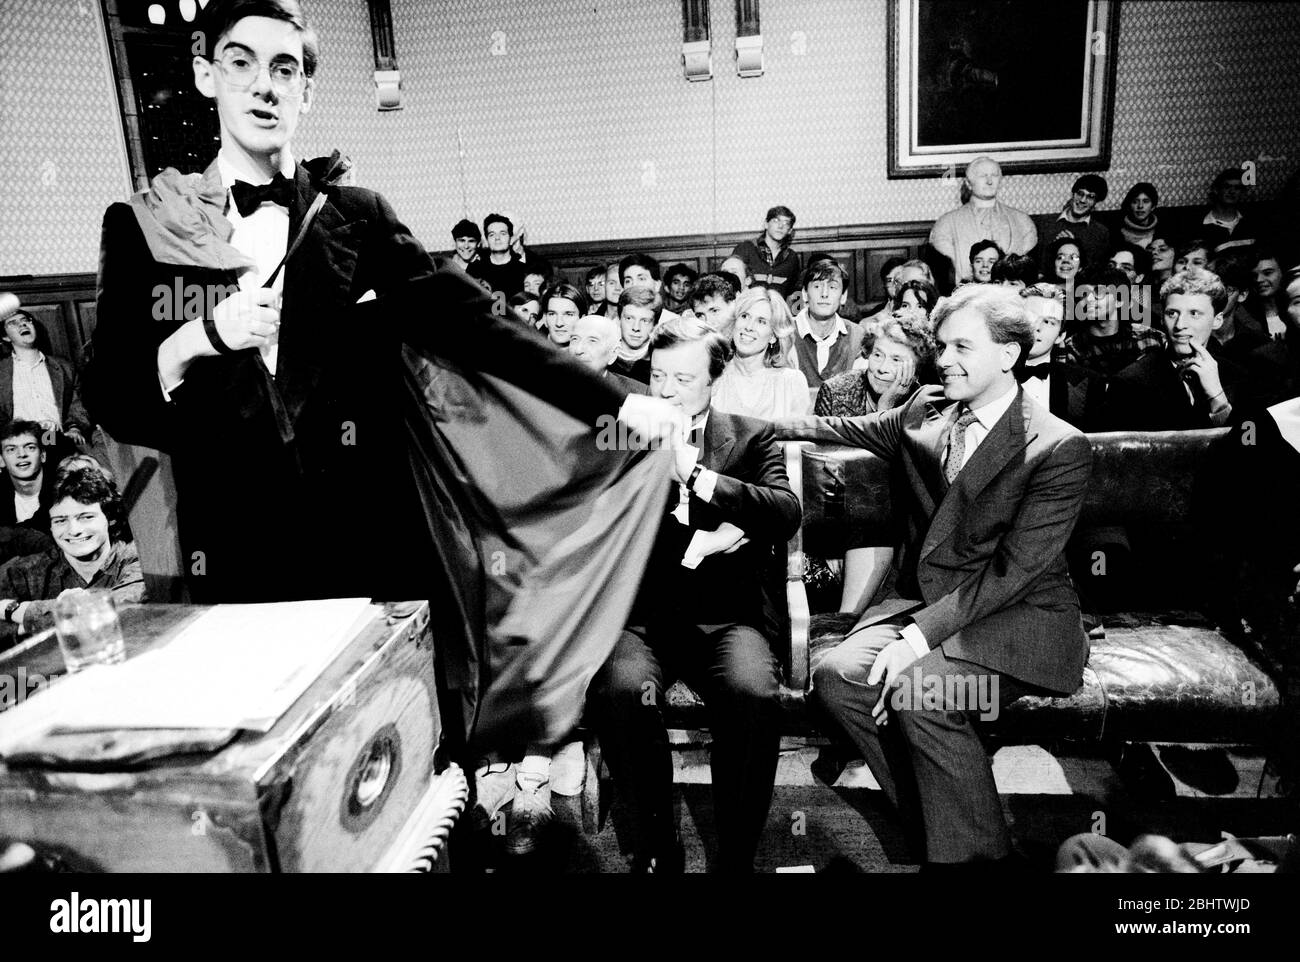 Jacob Rees-Mogg speaks at the Oxford Union Society in 1991. Listening are Kenneth Clarke and John Patten. Stock Photo